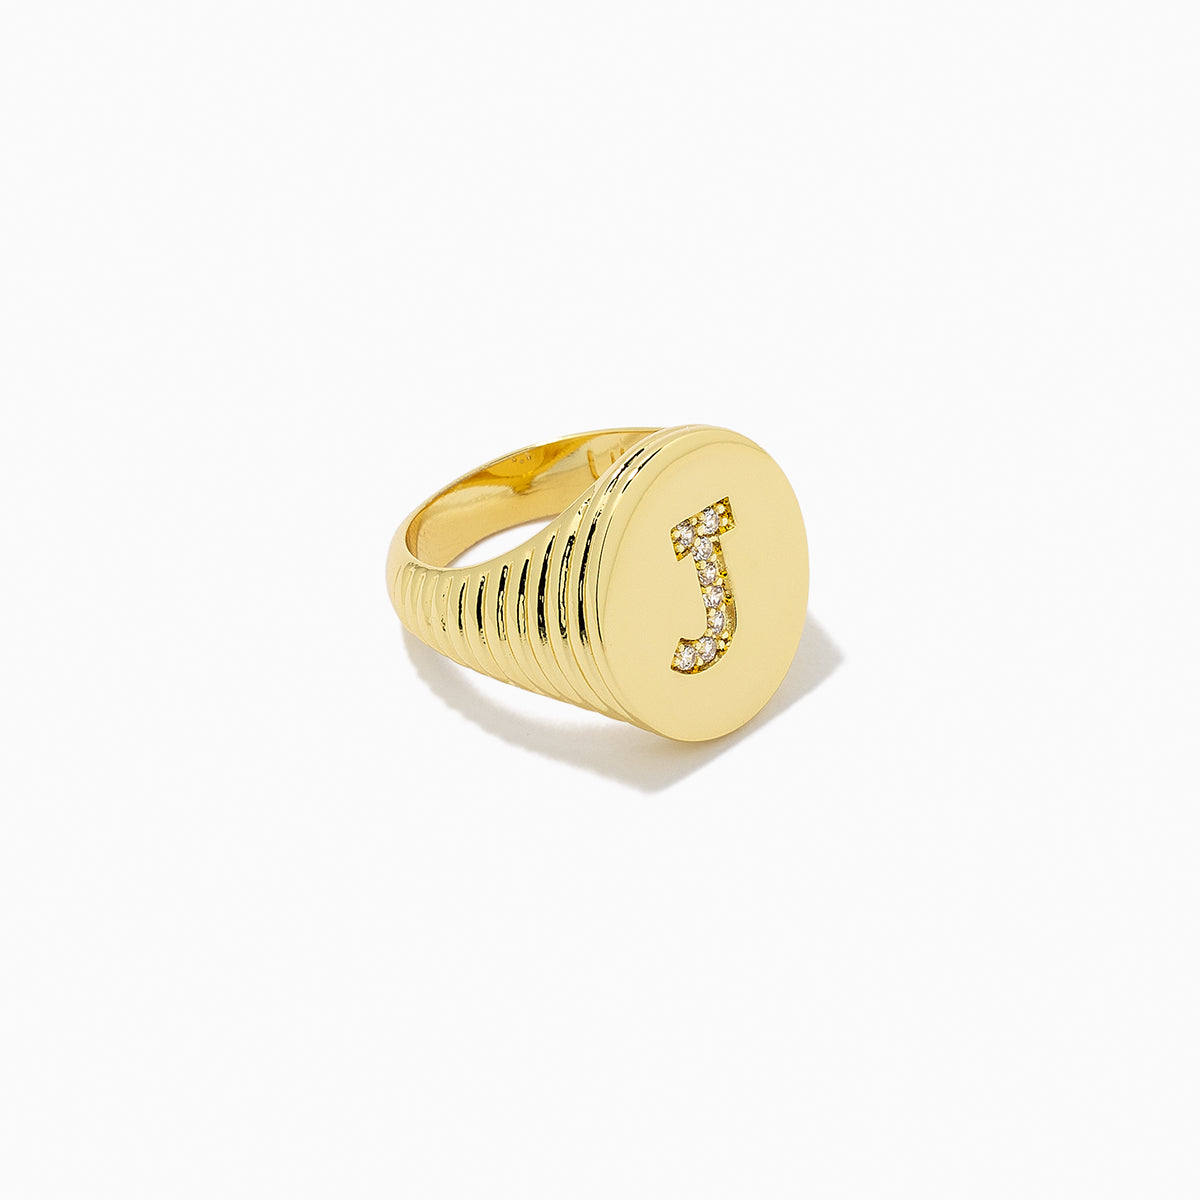 Initial Here Ring | Gold J 6 Gold J 7 Gold J 8 | Product Image | Uncommon James